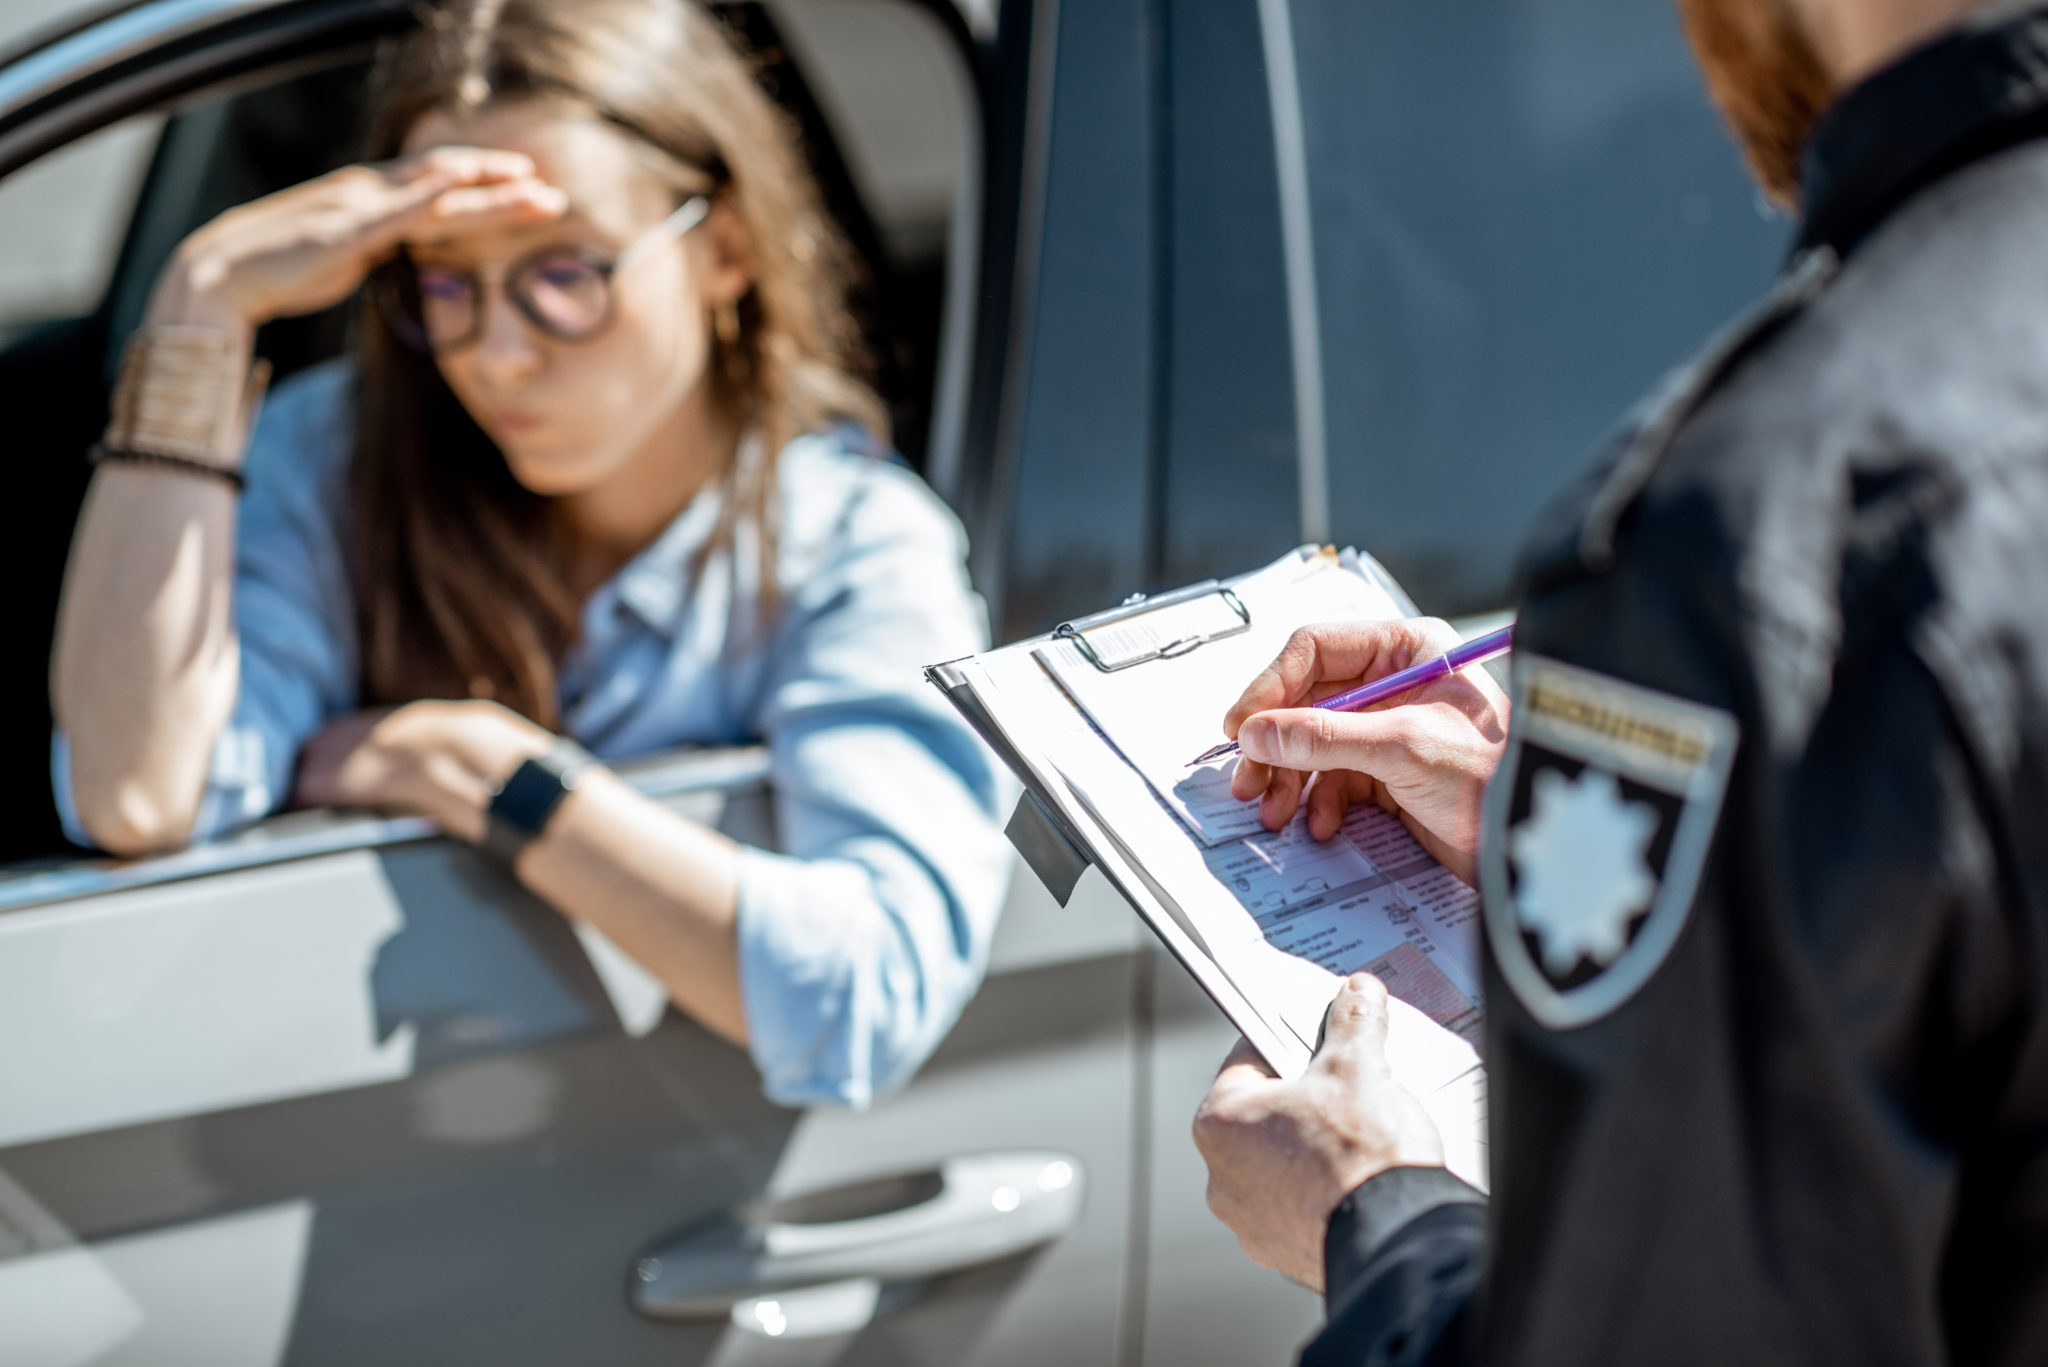 https://autolab.com.co/wp-content/uploads/2021/12/policeman-issuing-a-fine-for-a-female-driver-2021-10-13-20-27-03-utc-scaled.jpg